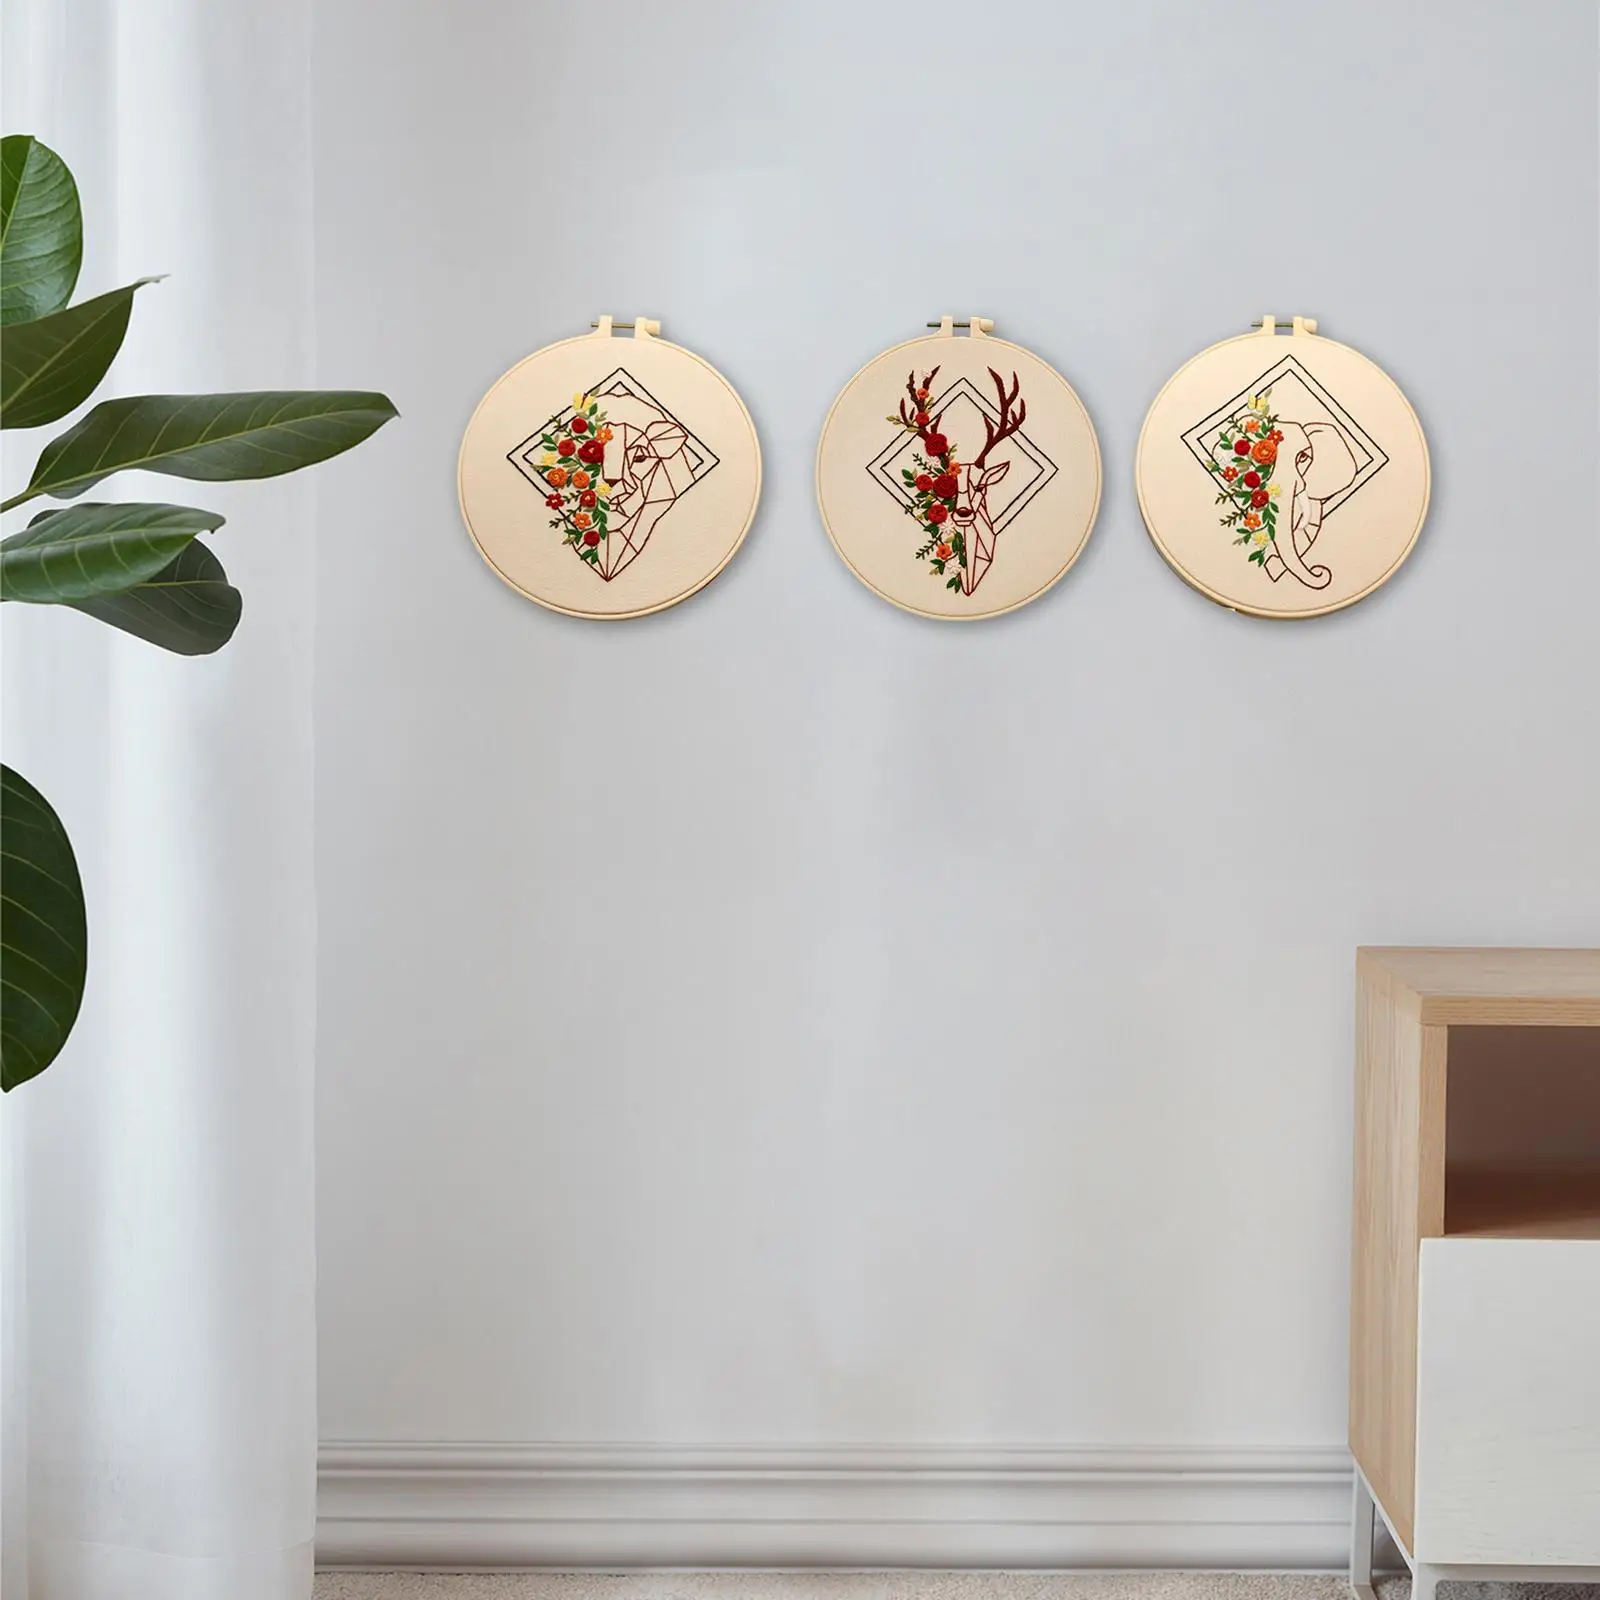 3 Piece Embroidery Starter Handcrafted Projects with Embroidery Hoop DIY